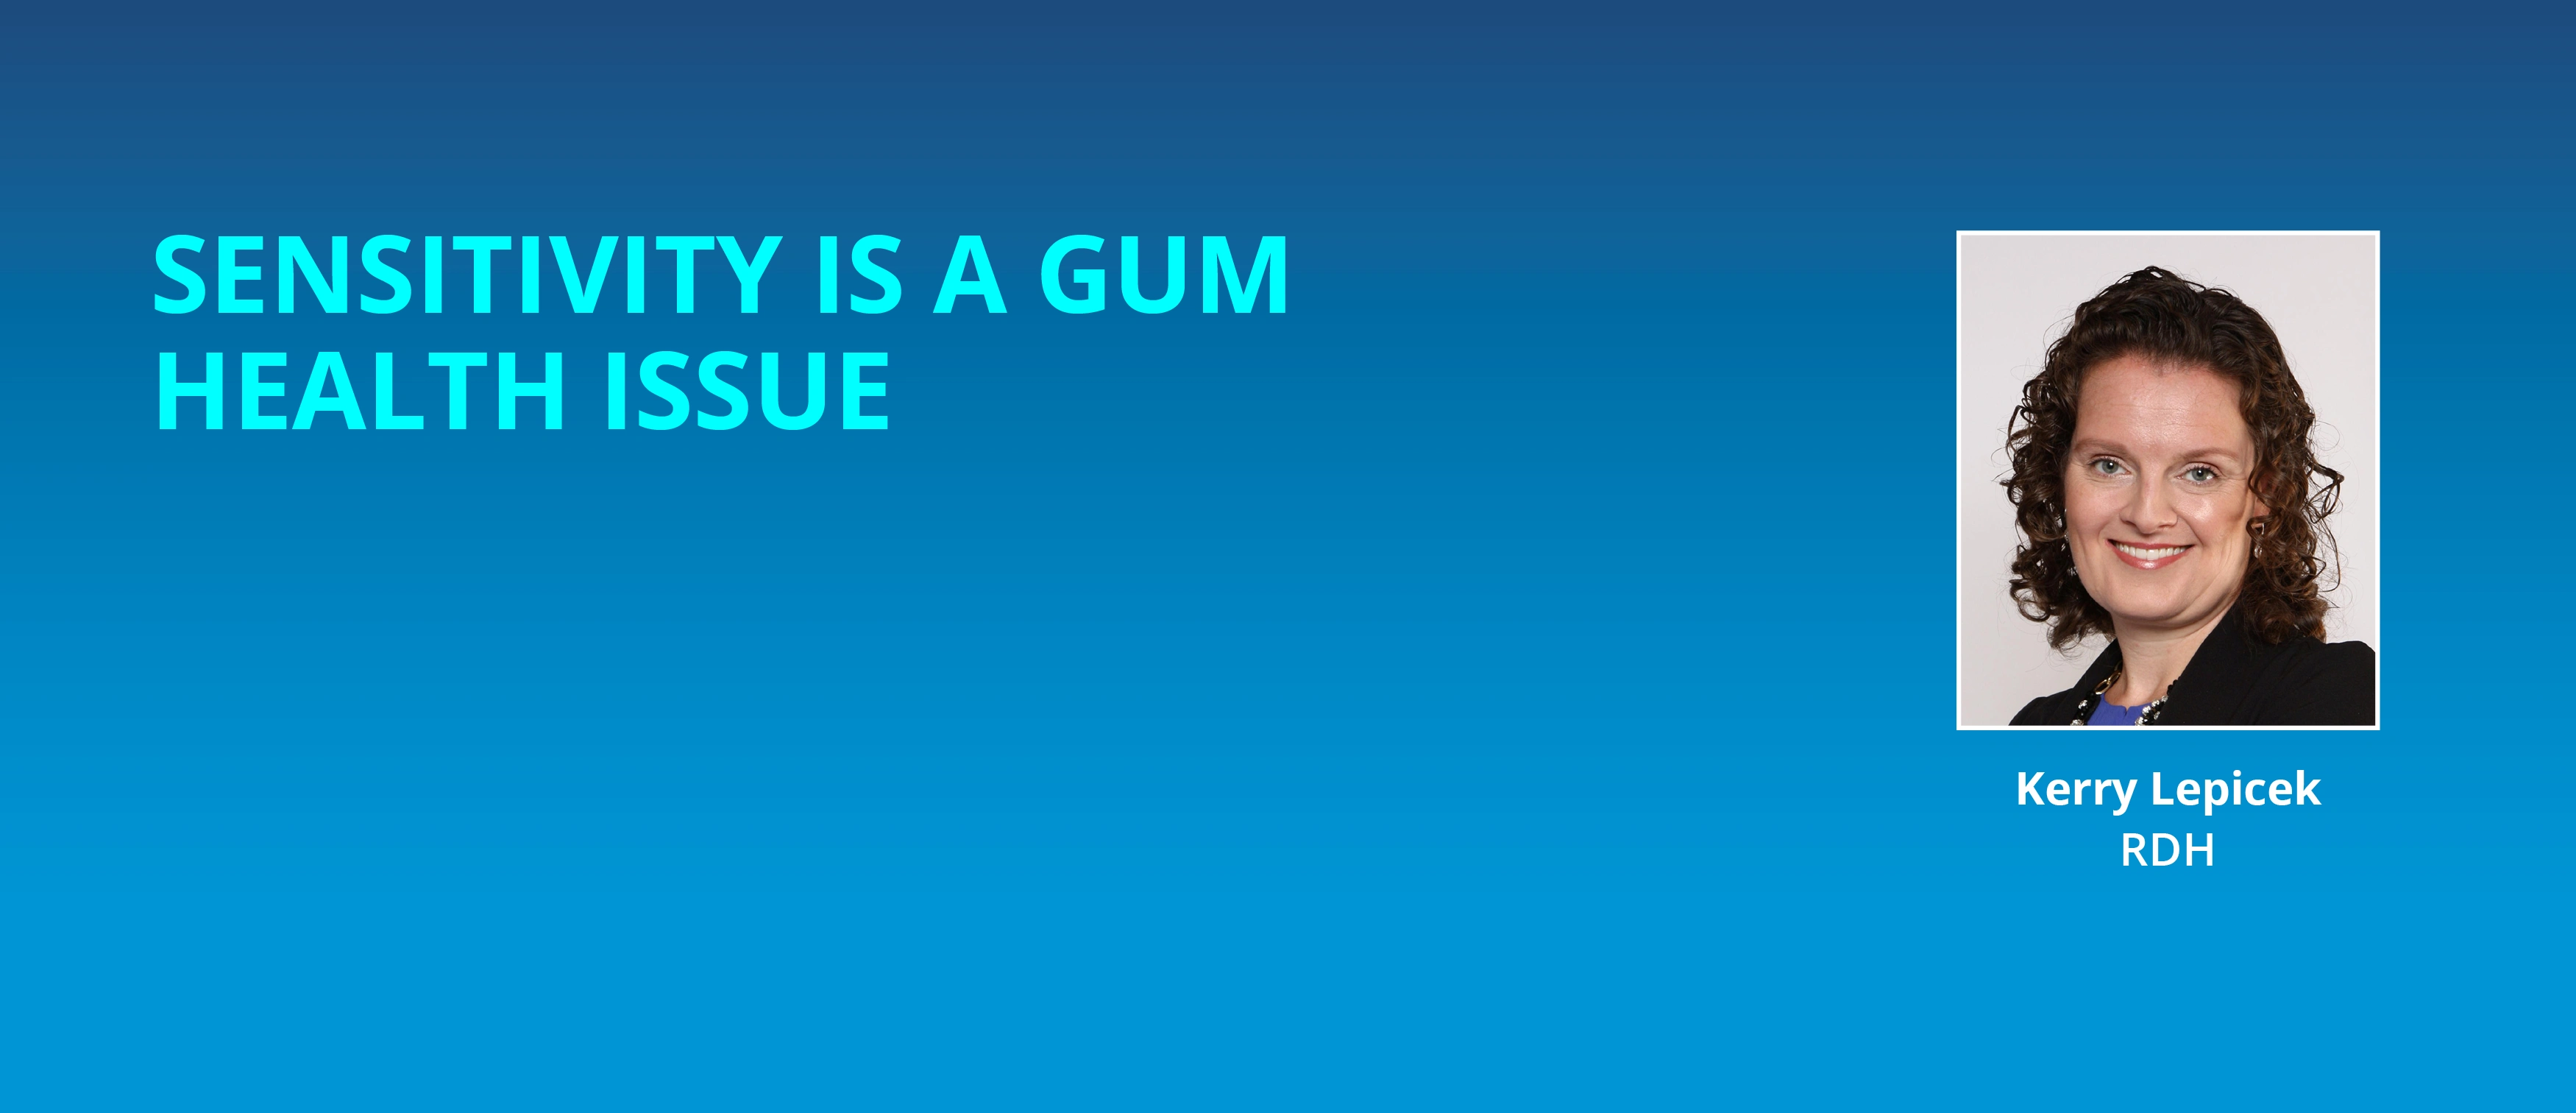 Sensitivity is a gum health issue